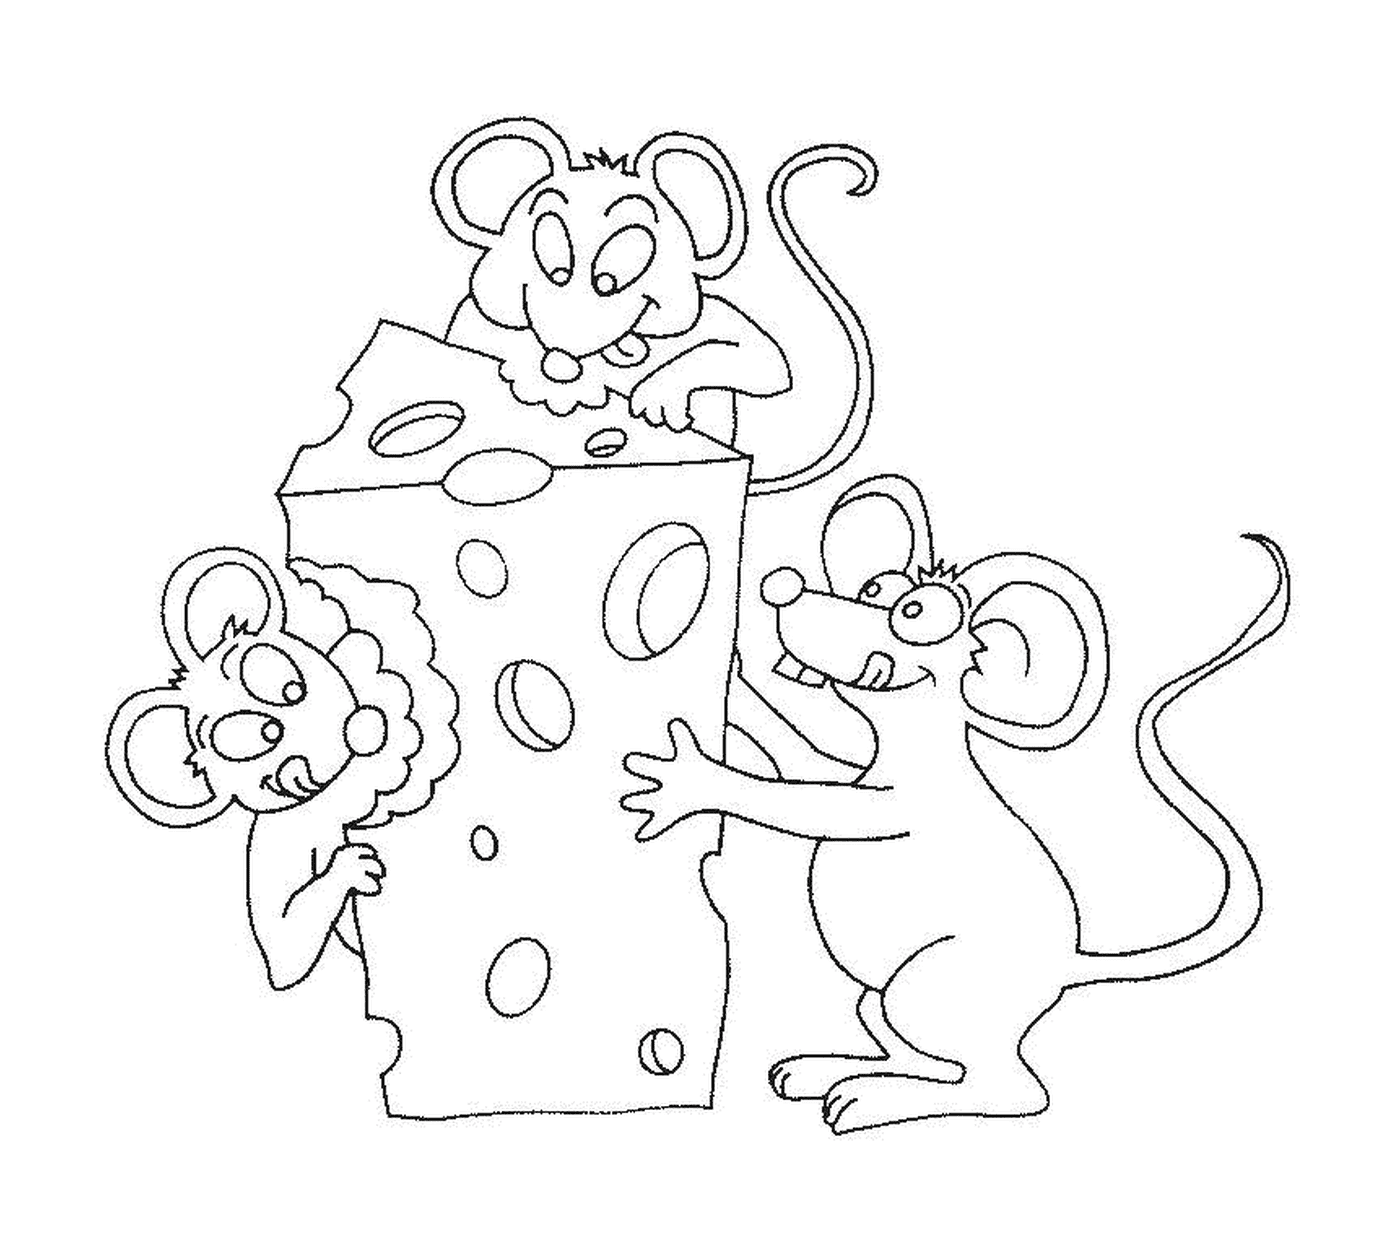  Three mice for a piece of cheese 